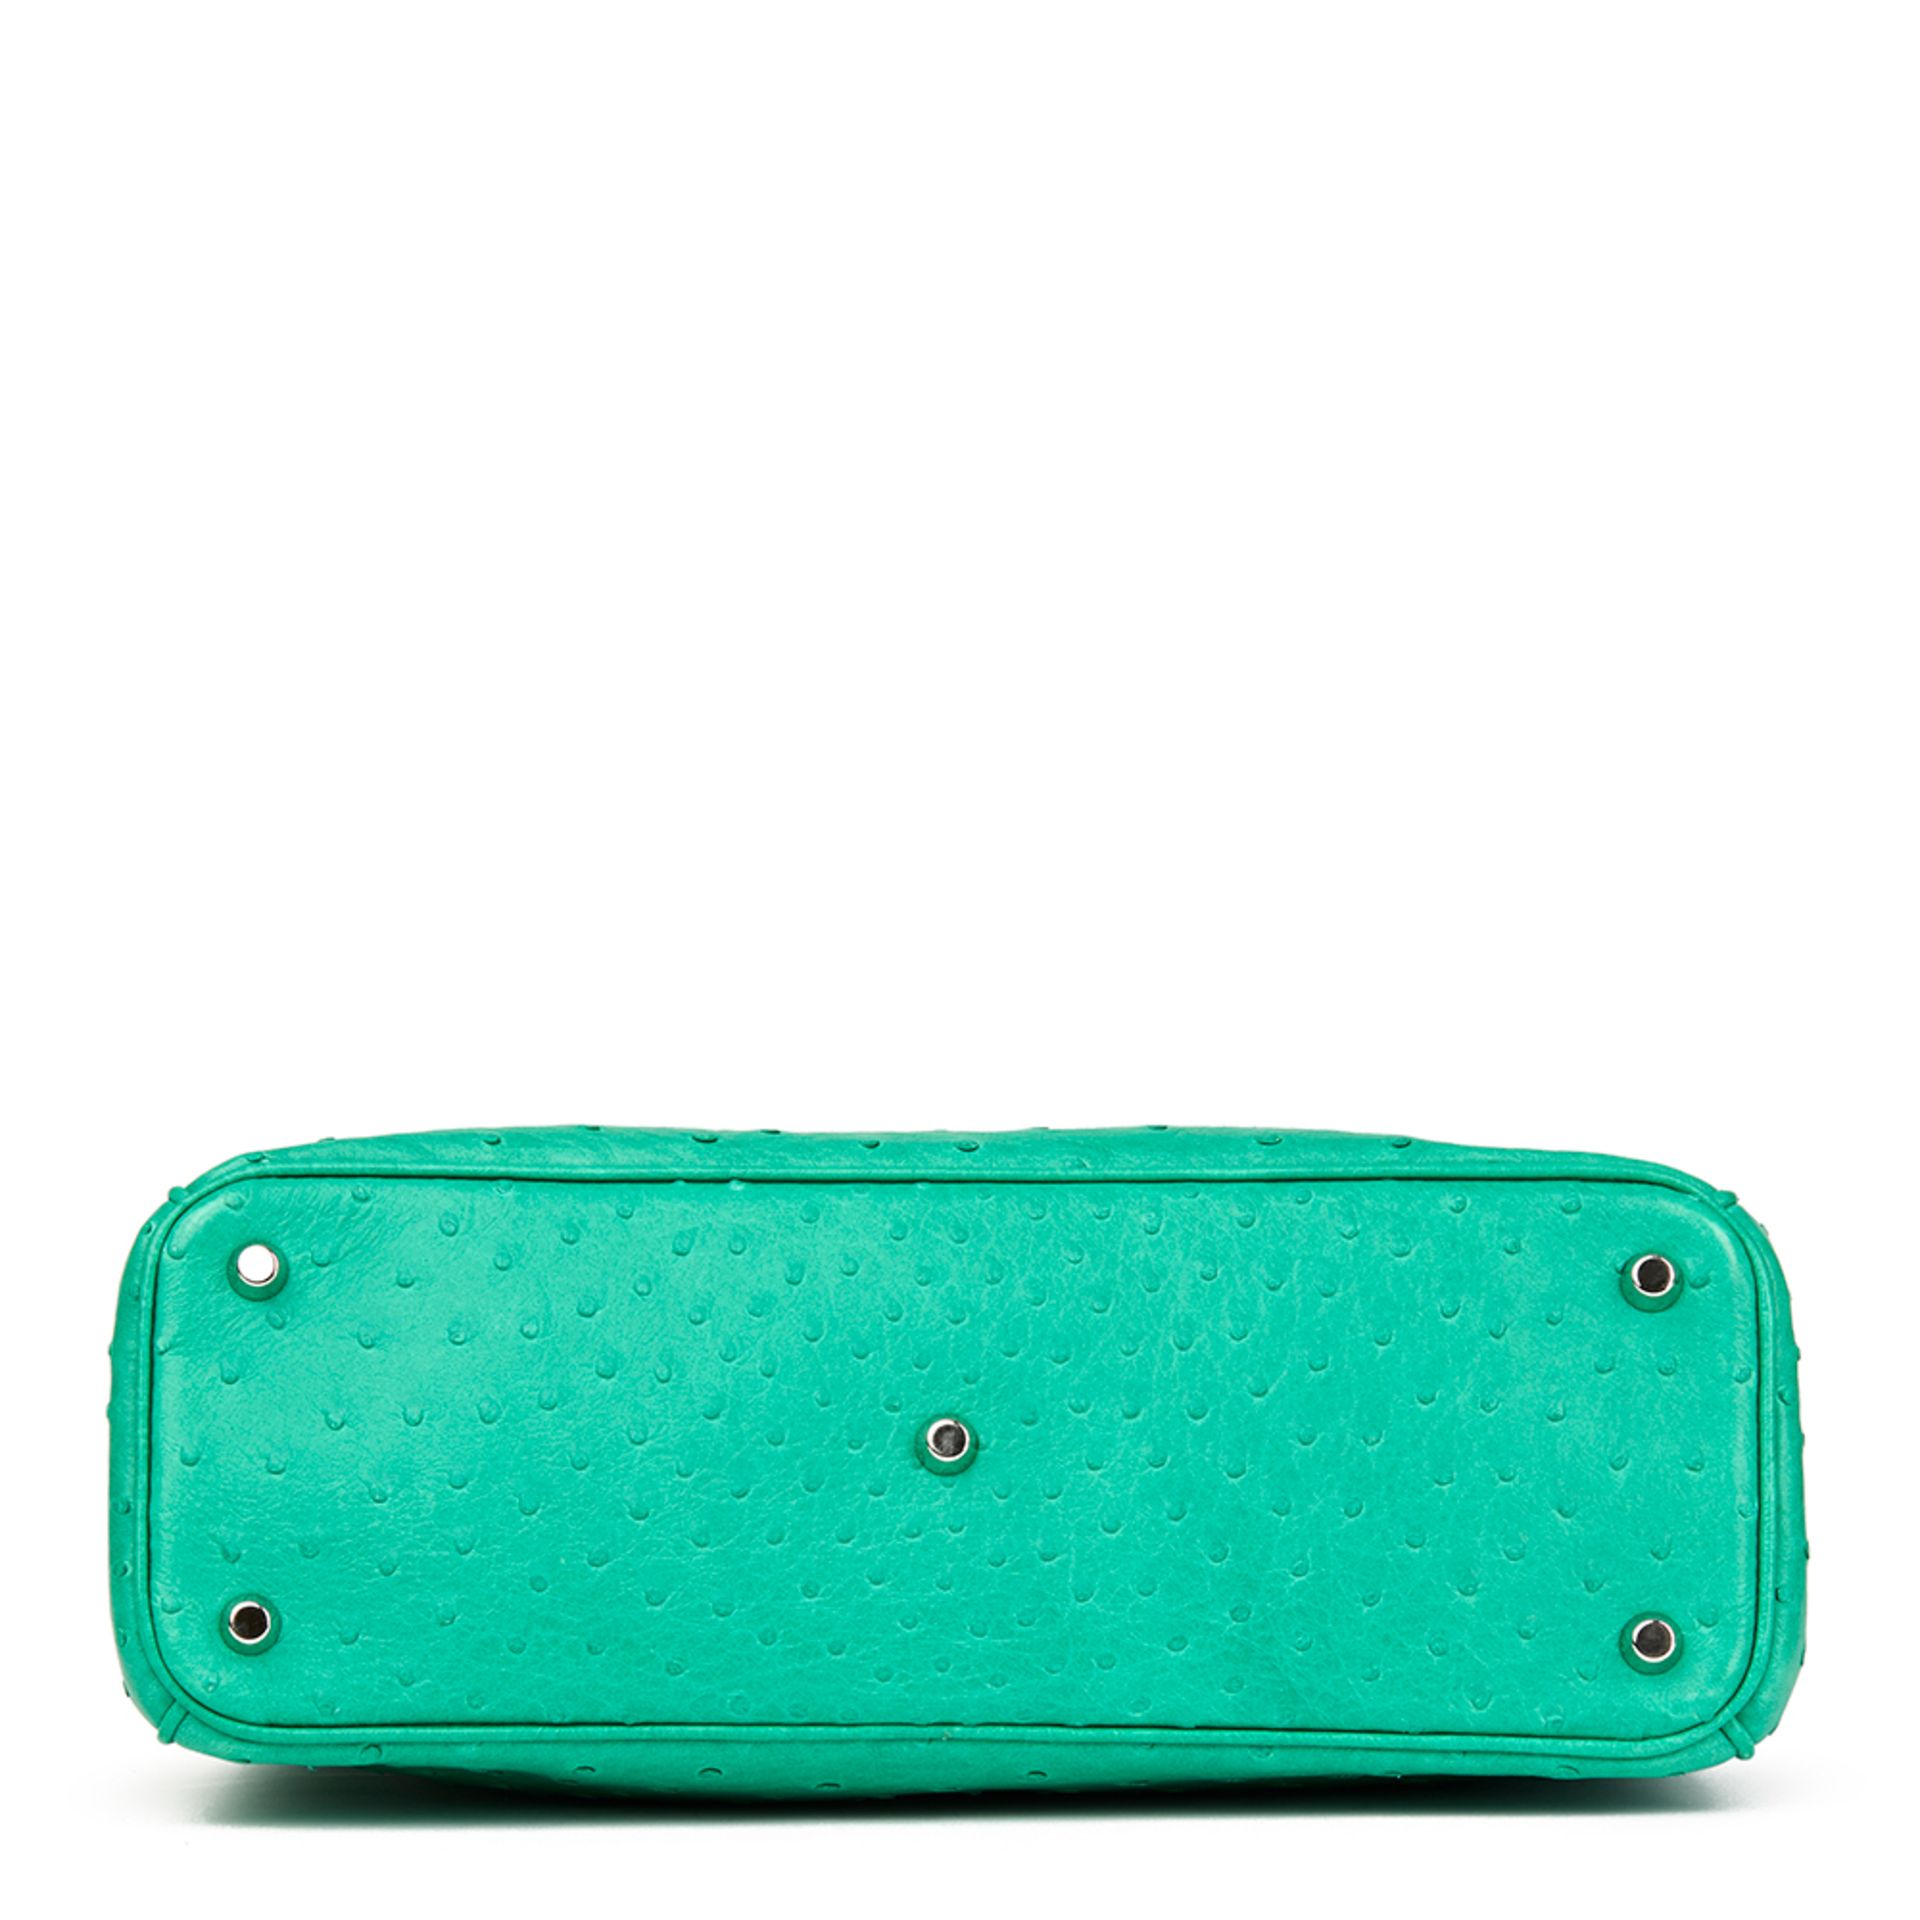 Christian Dior Emerald Ostrich Leather Diorissimo Mm - Image 8 of 11